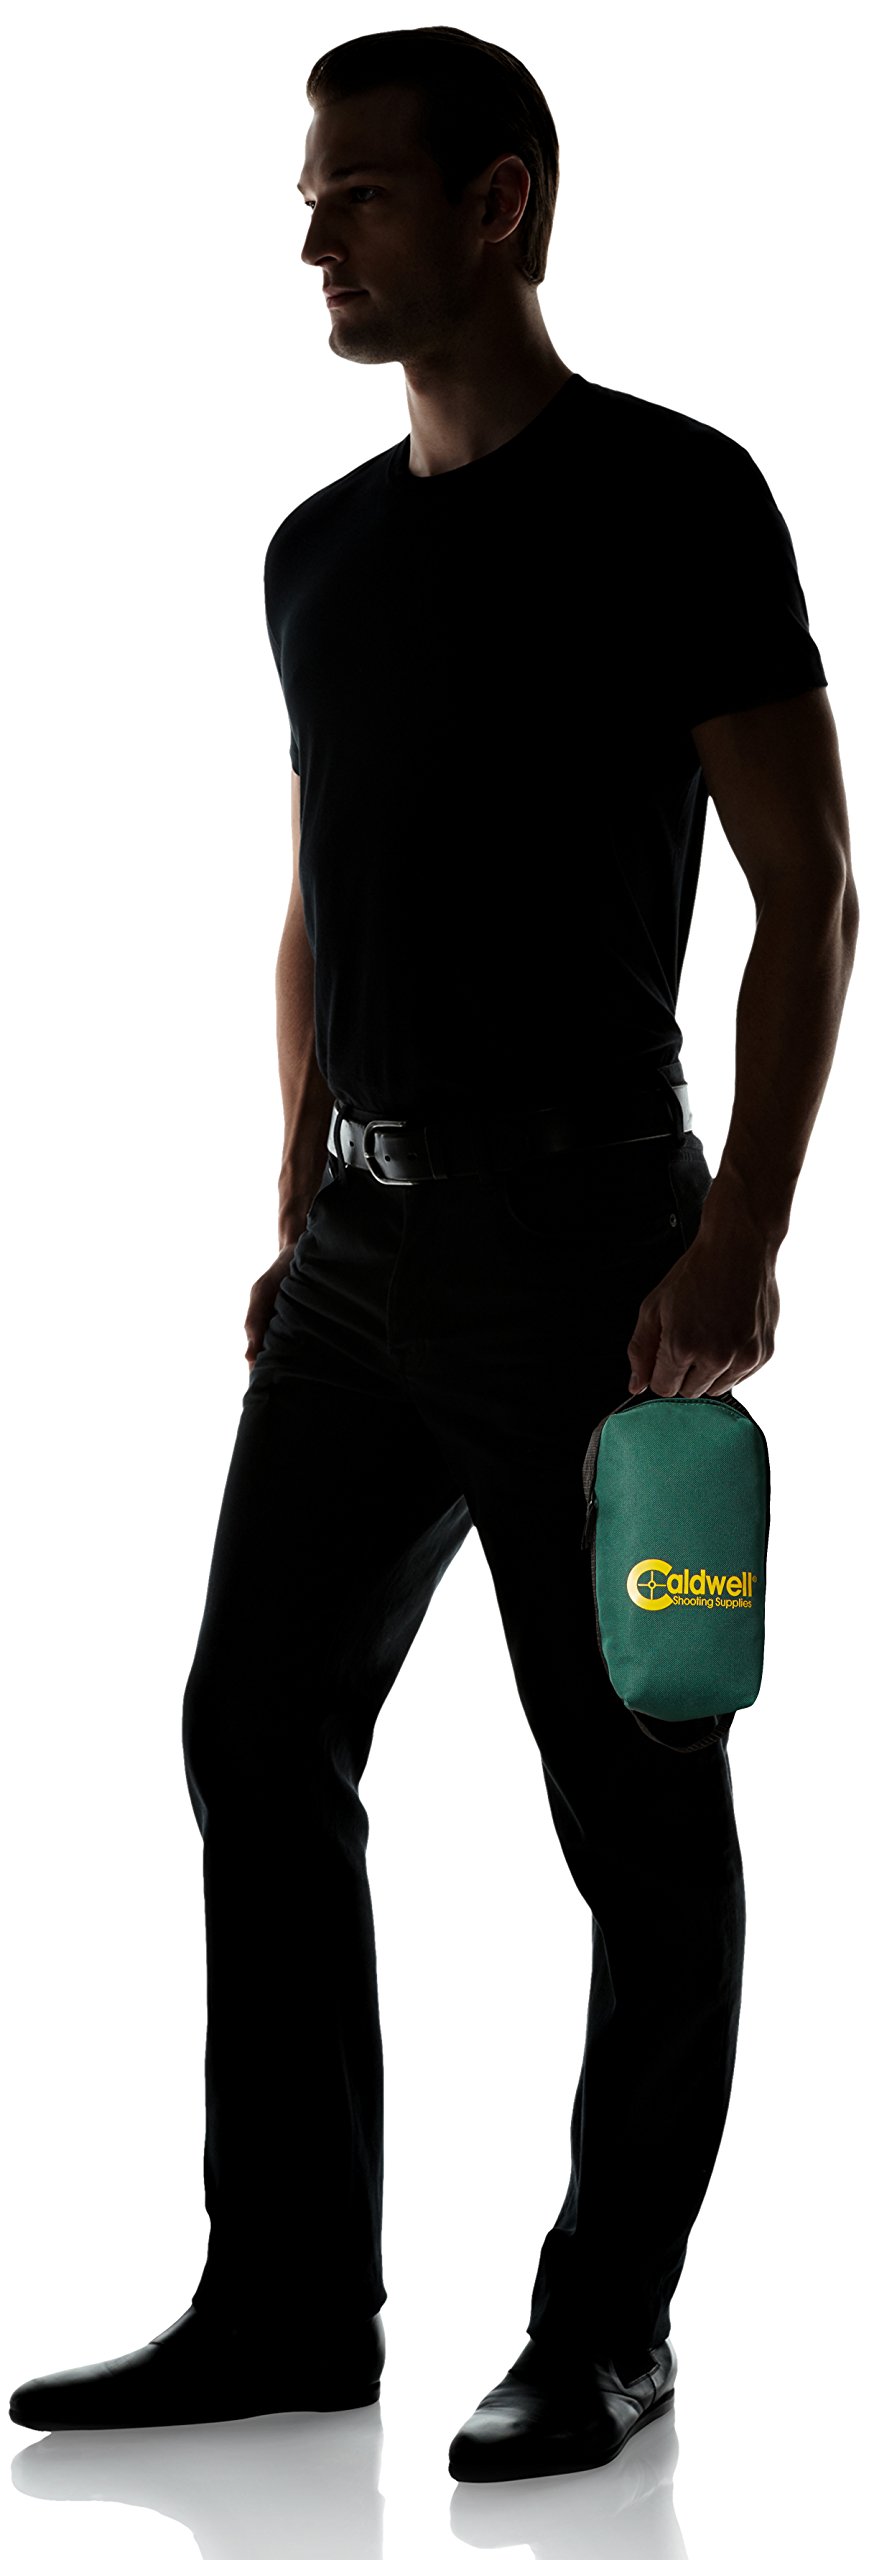 Caldwell Lead Sled Weight Bag with Durable Construction and Water Resistance for Outdoor, Range, Shooting and Hunting